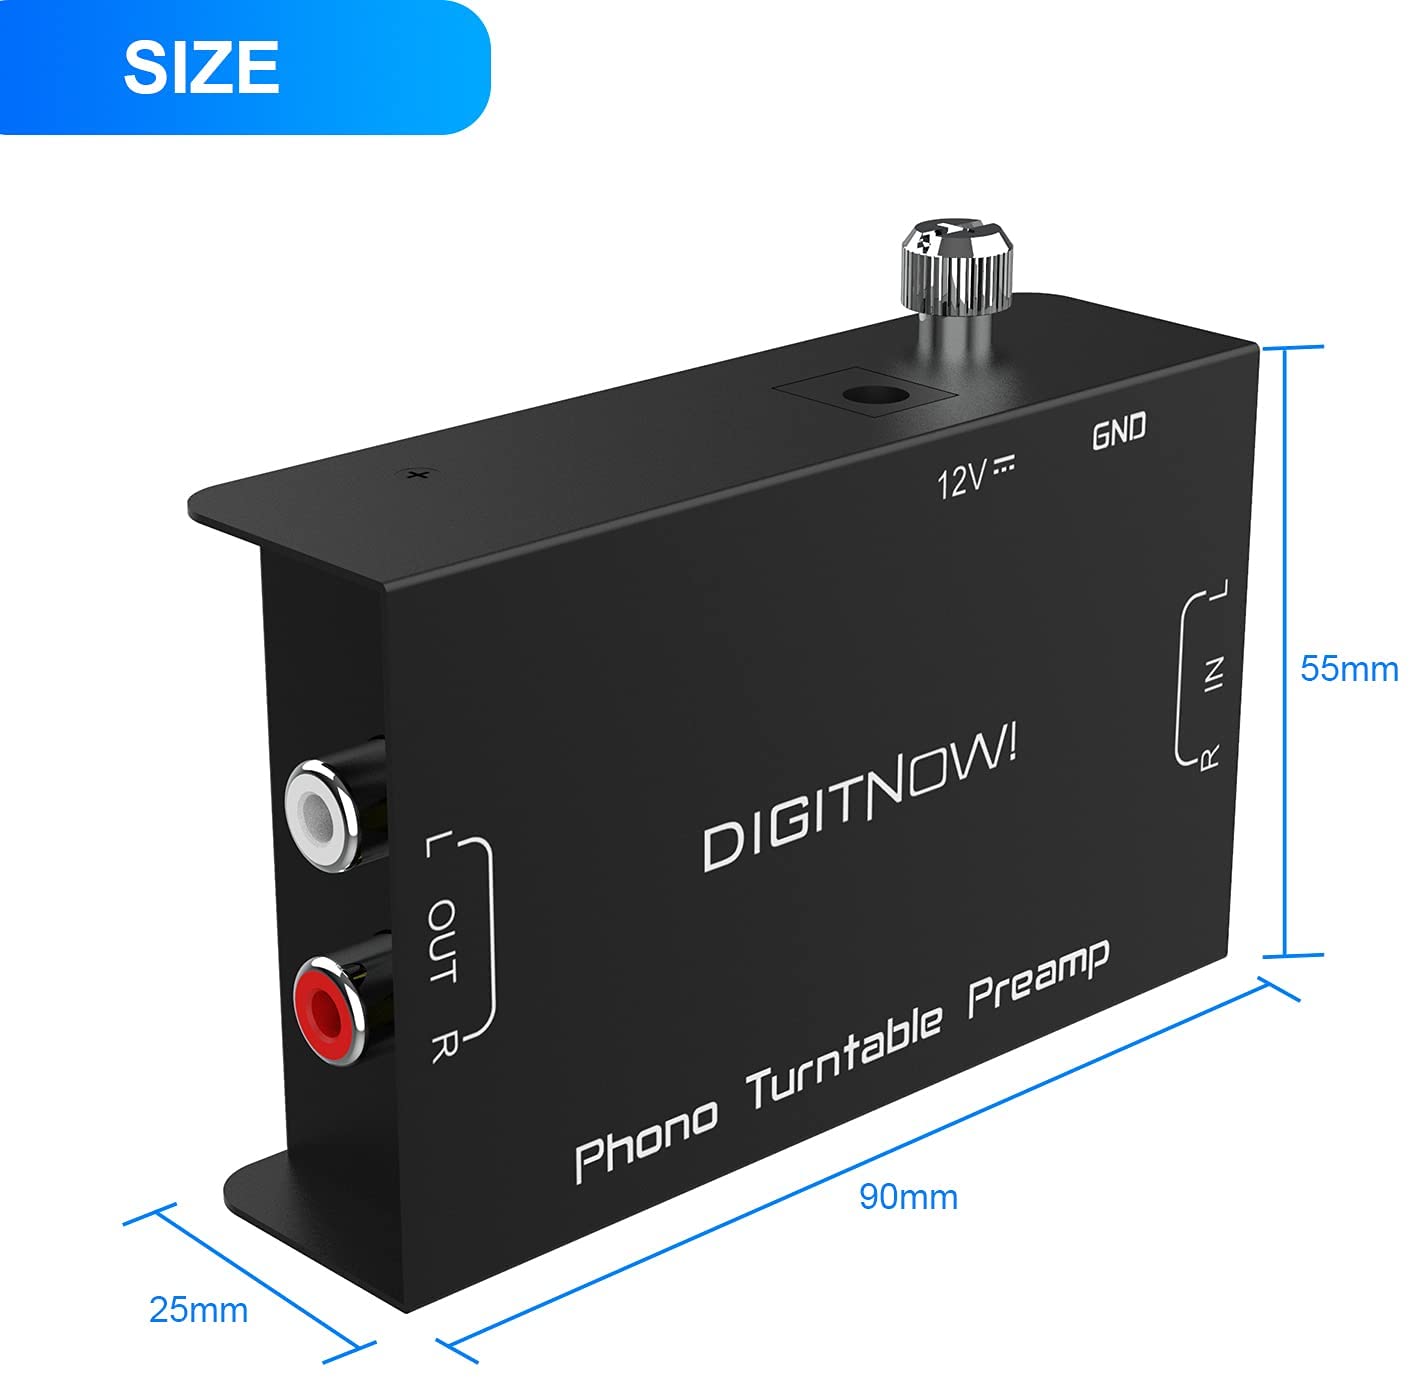 Phono Turntable Preamp,Mini Electronic Stereo Audio Phonograph Preamplifier with RCA Input &Output,Low Noise Operation for Home Theater,12 Volt DC Adapter Included